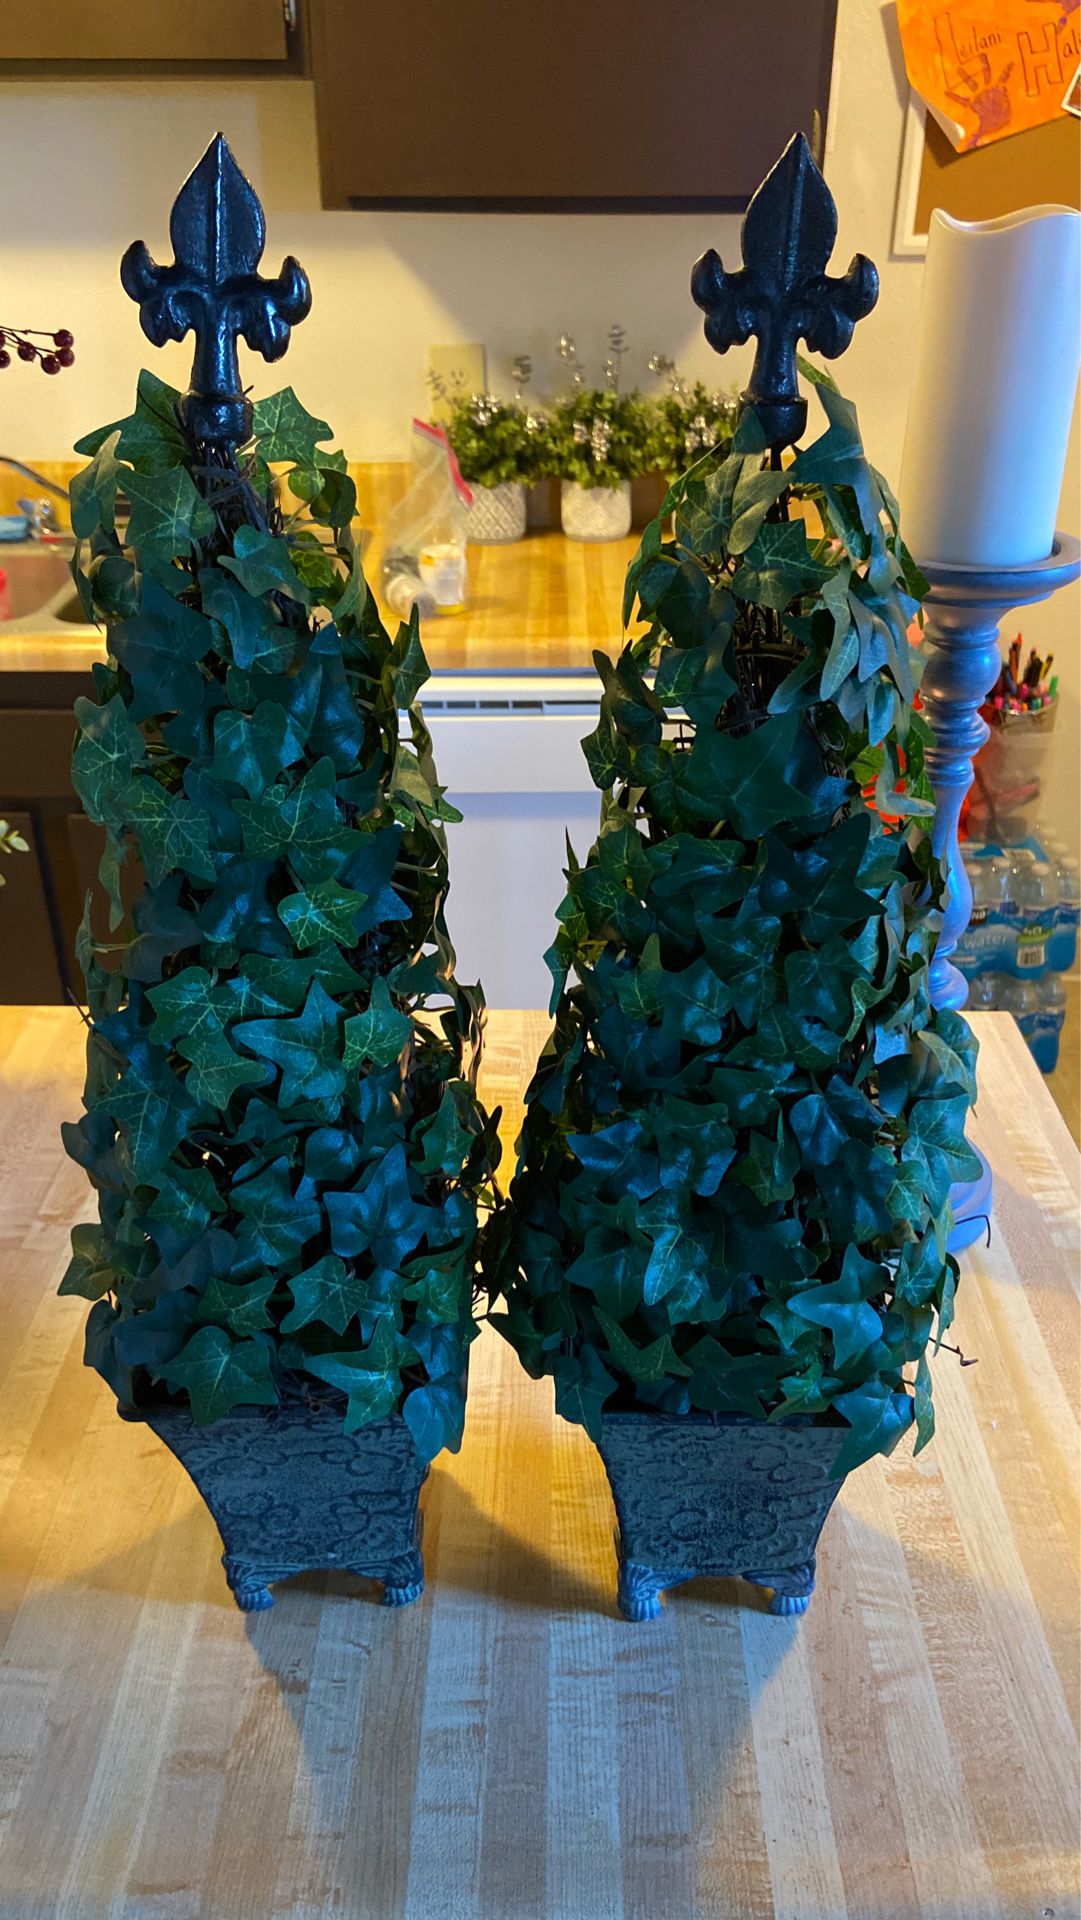 Two 24in House plants